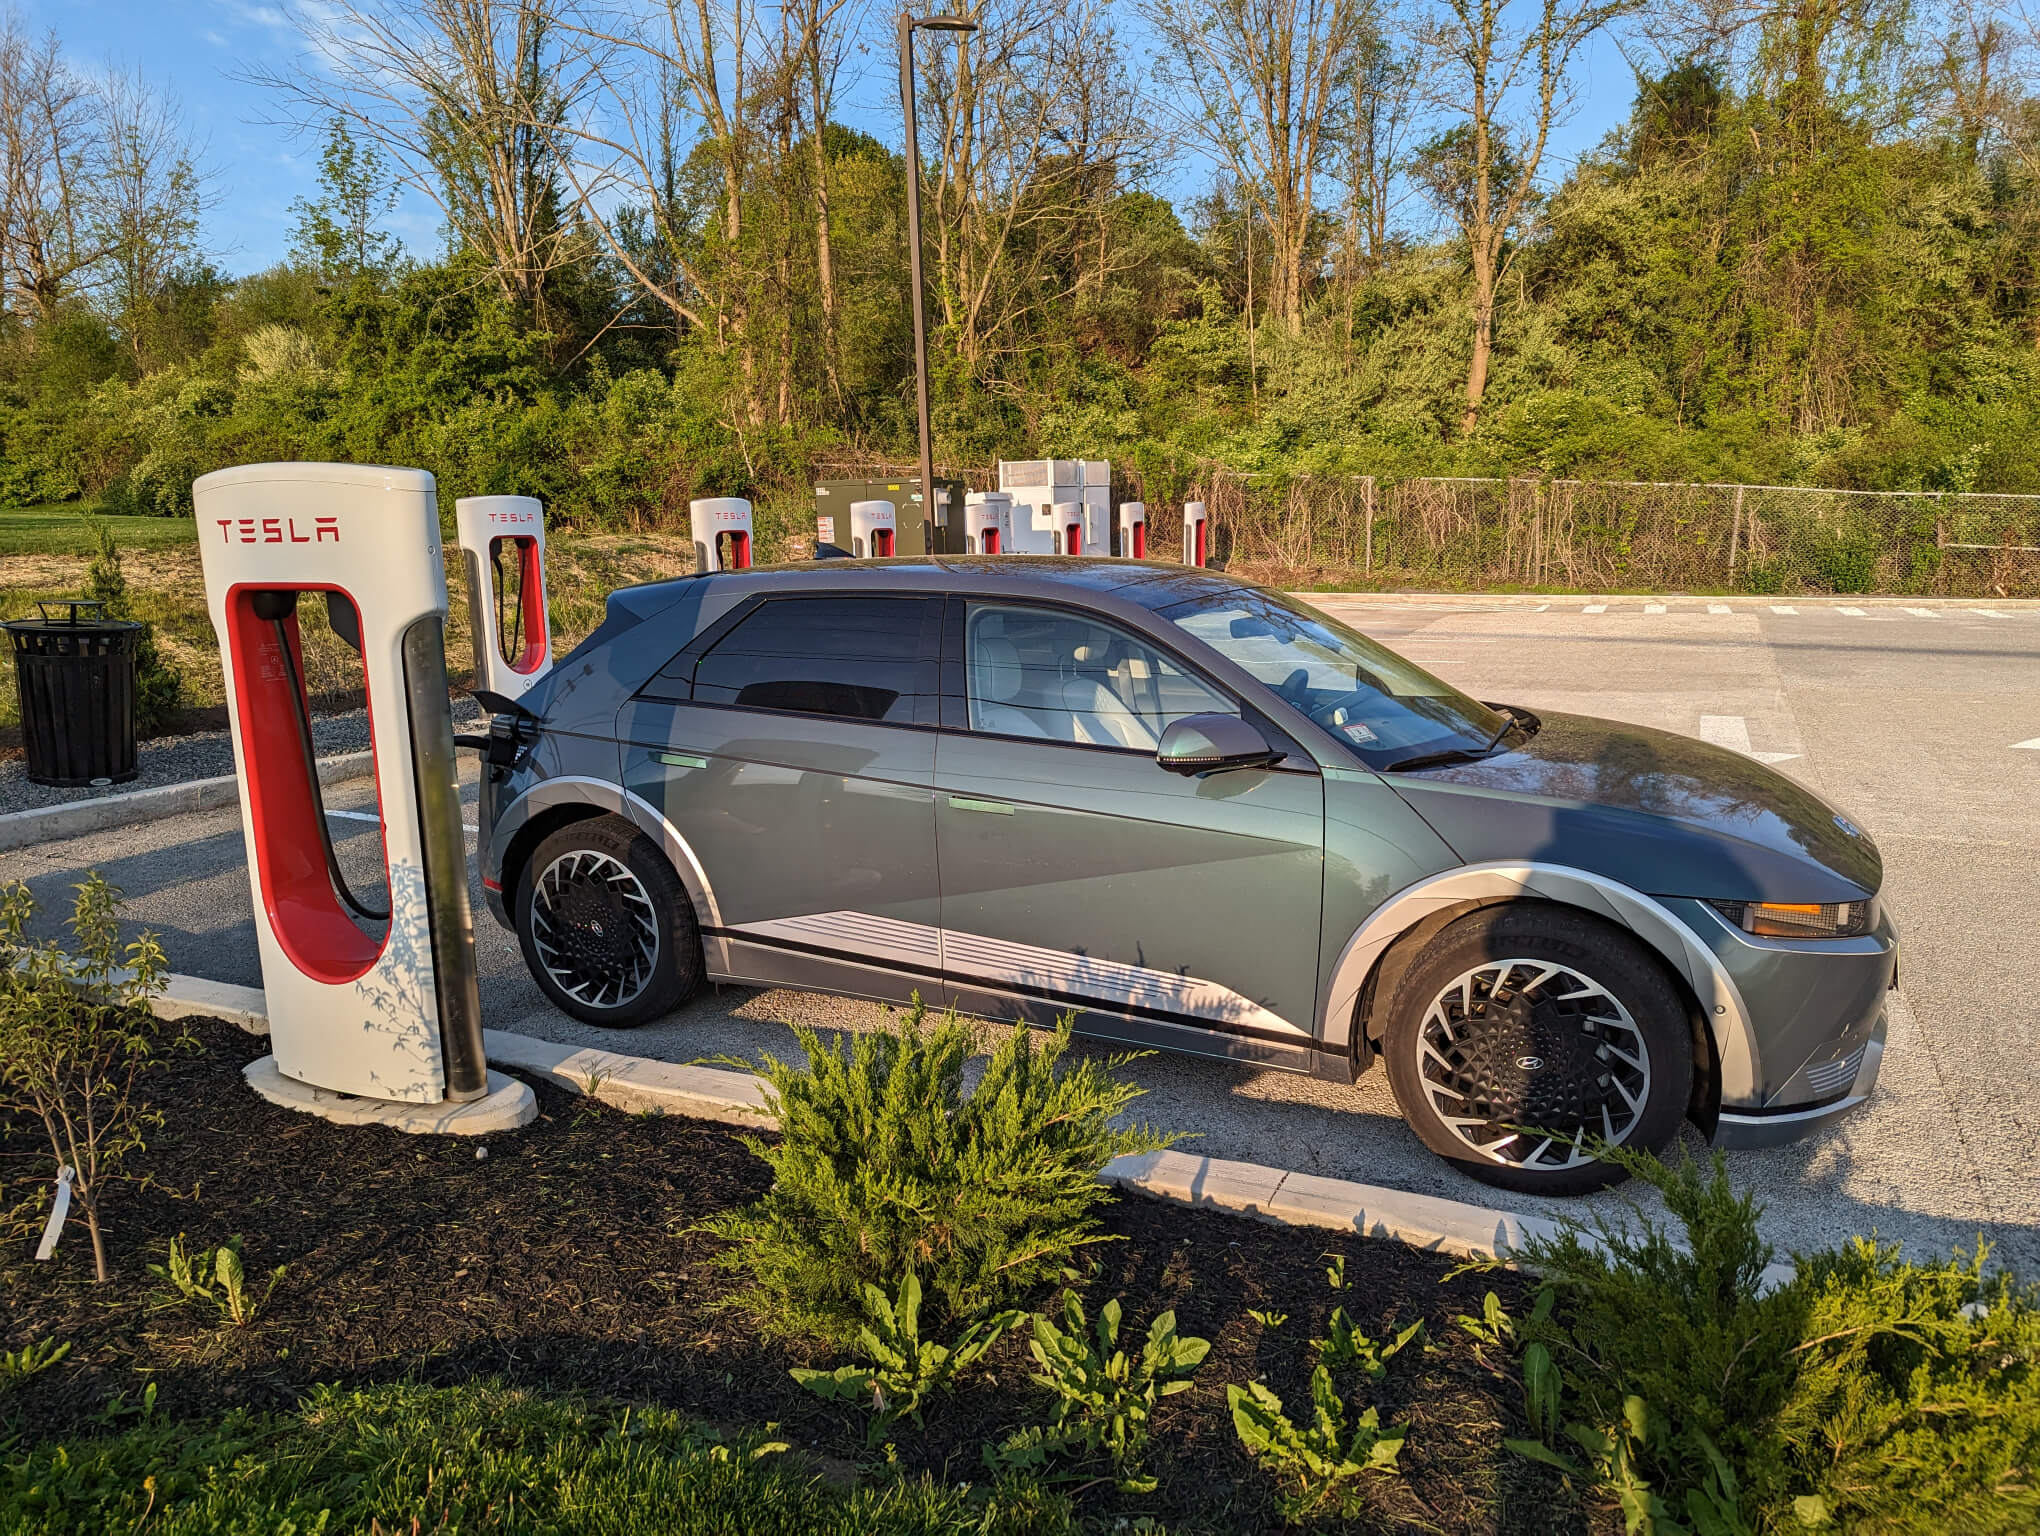 Hyundai IONIQ 5 charges at a Tesla Supercharger with Magic Dock in Brewster, NY